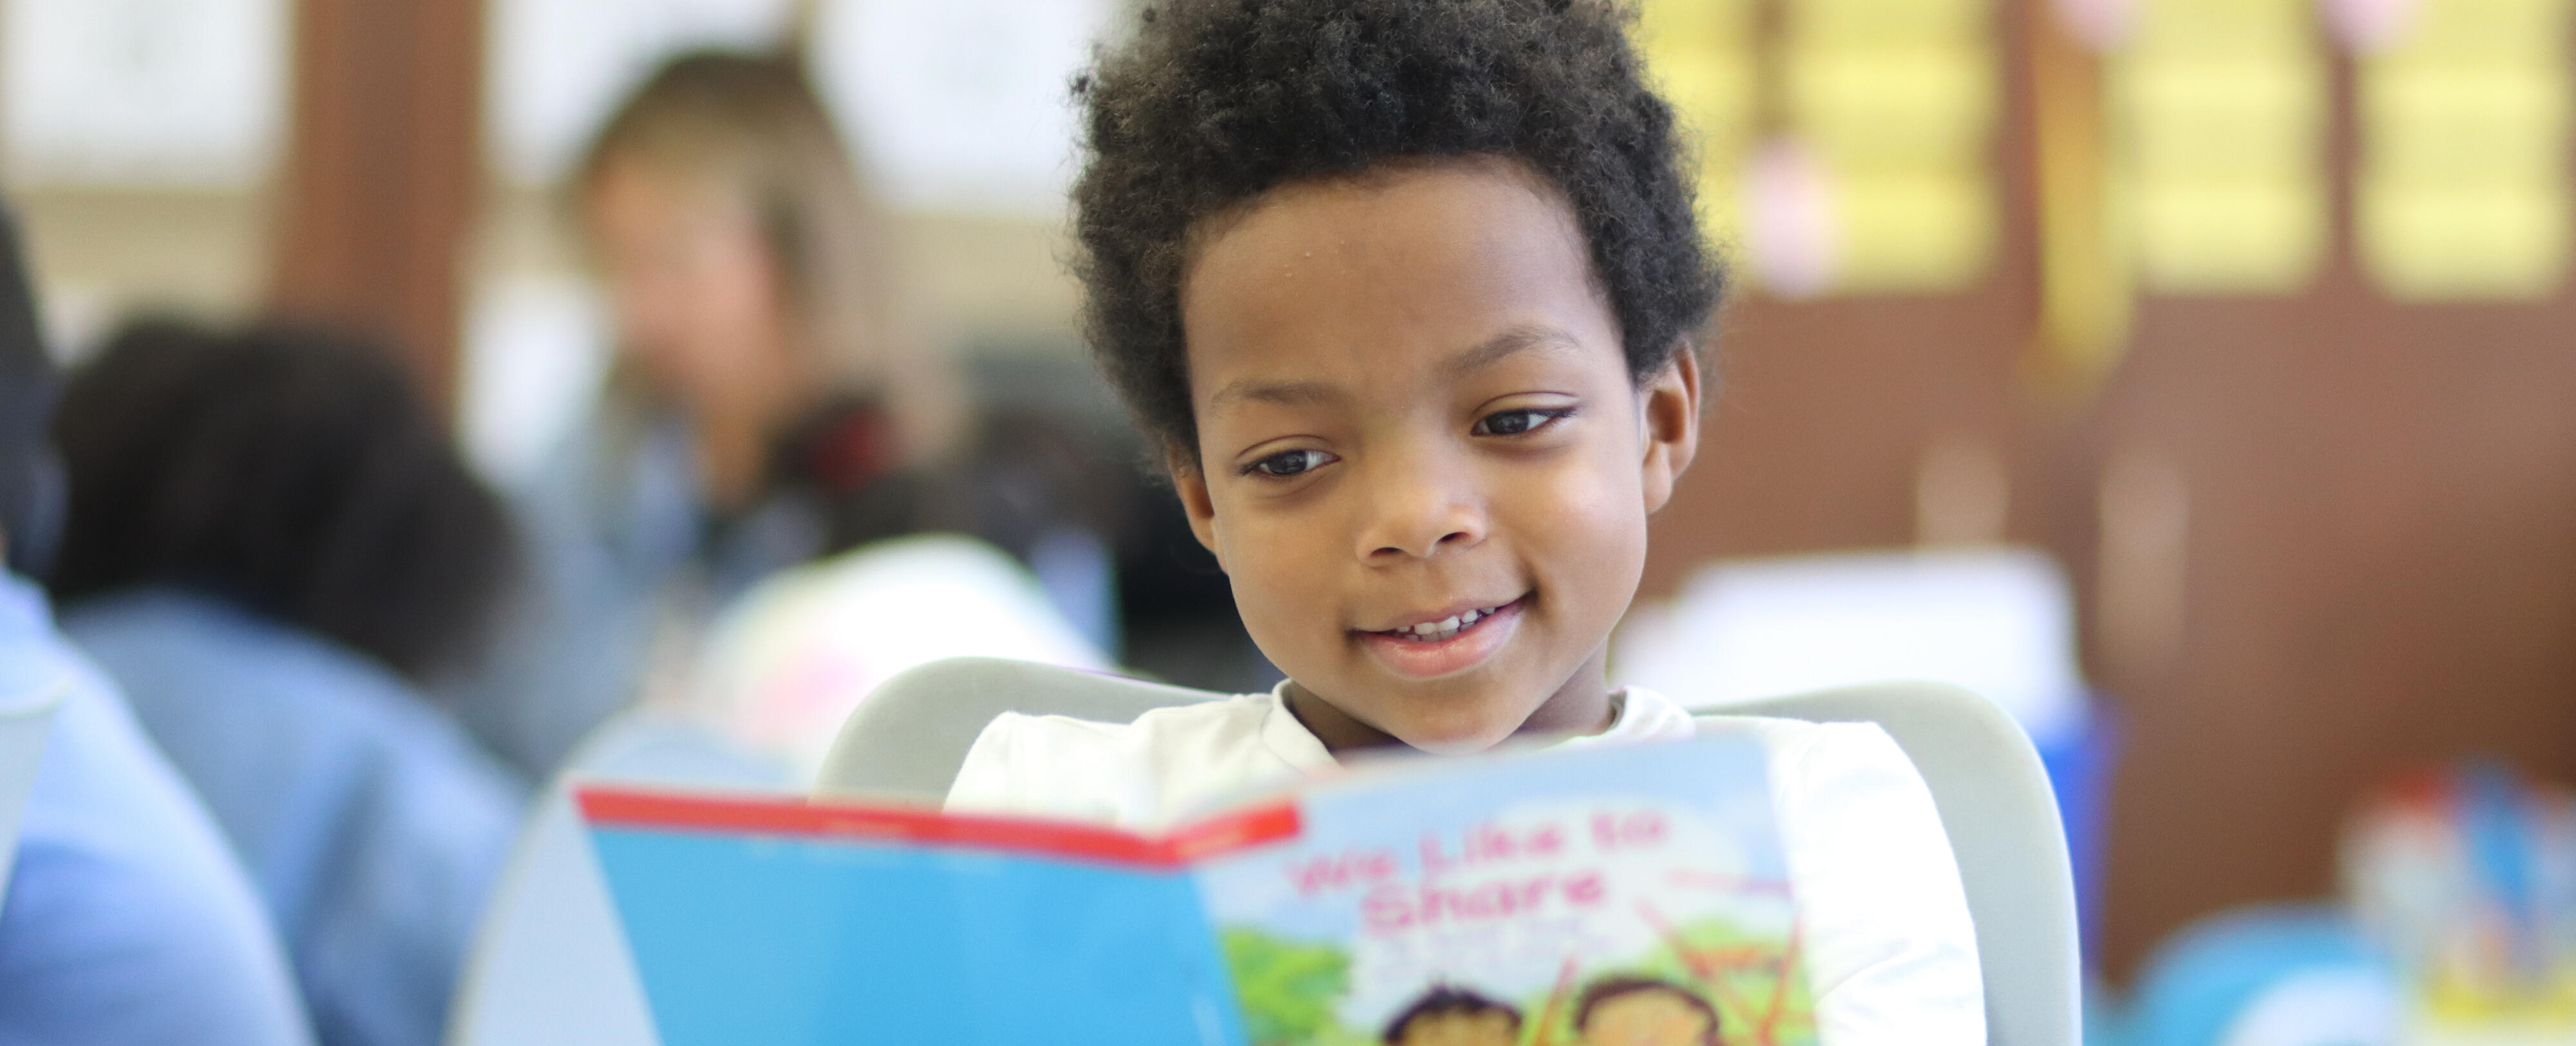 Elementary student smiling while reading